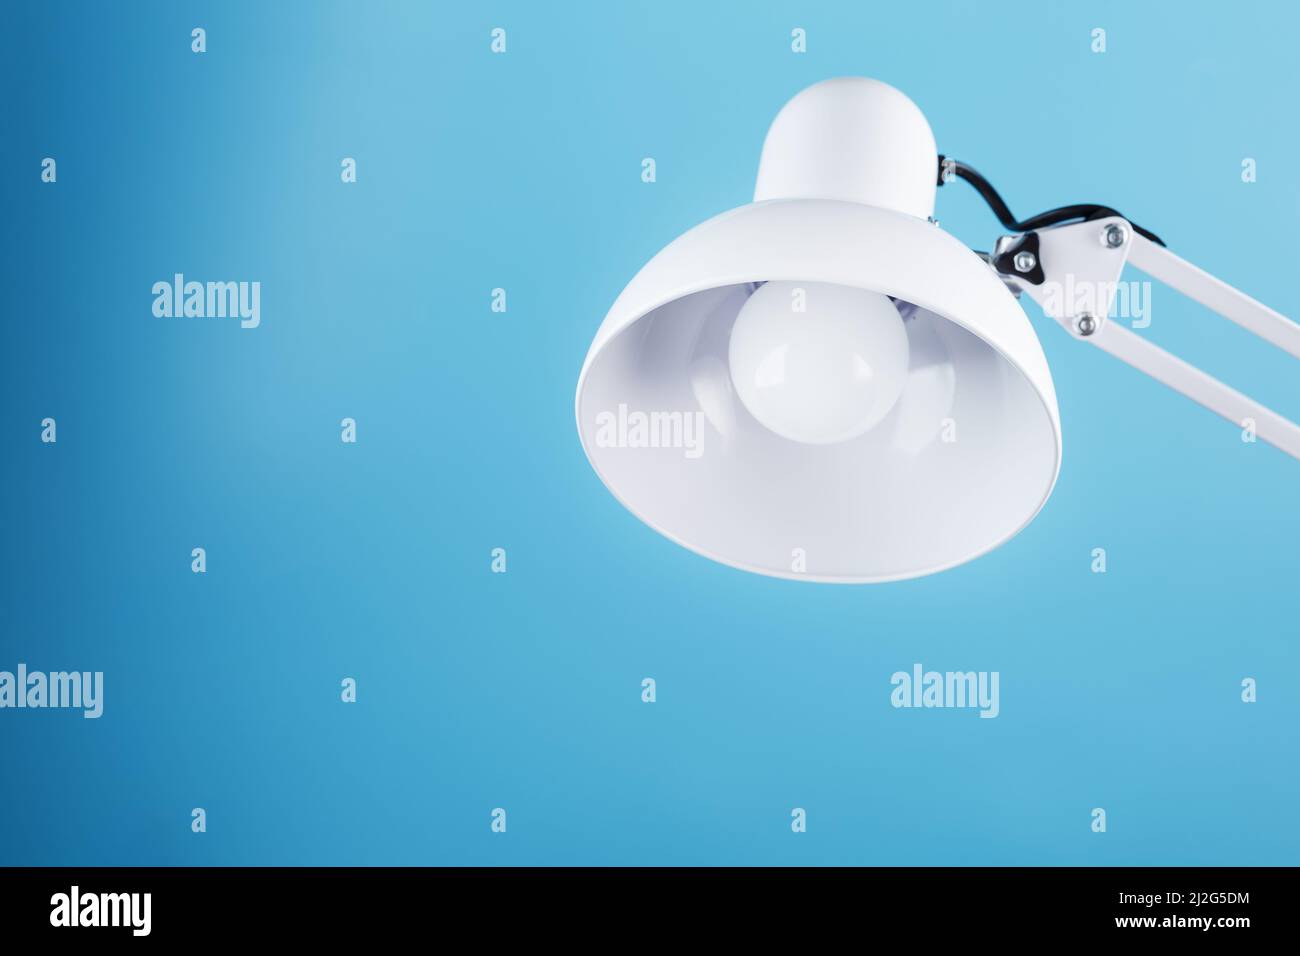 Office table lamp on blue background with space for text and idea concept Stock Photo